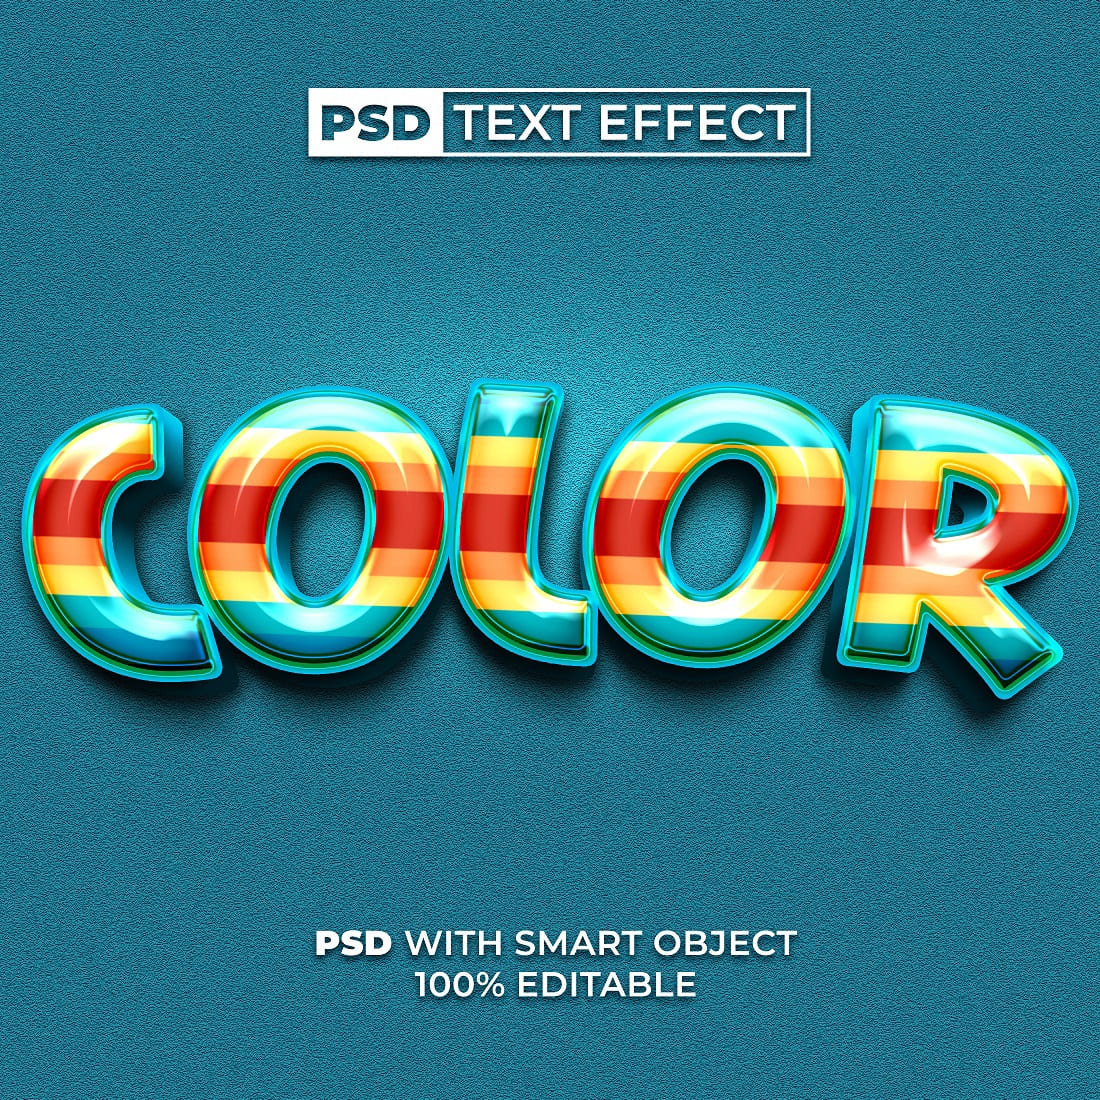 PSD 3D Color Text Effect Colorful Style cover image.